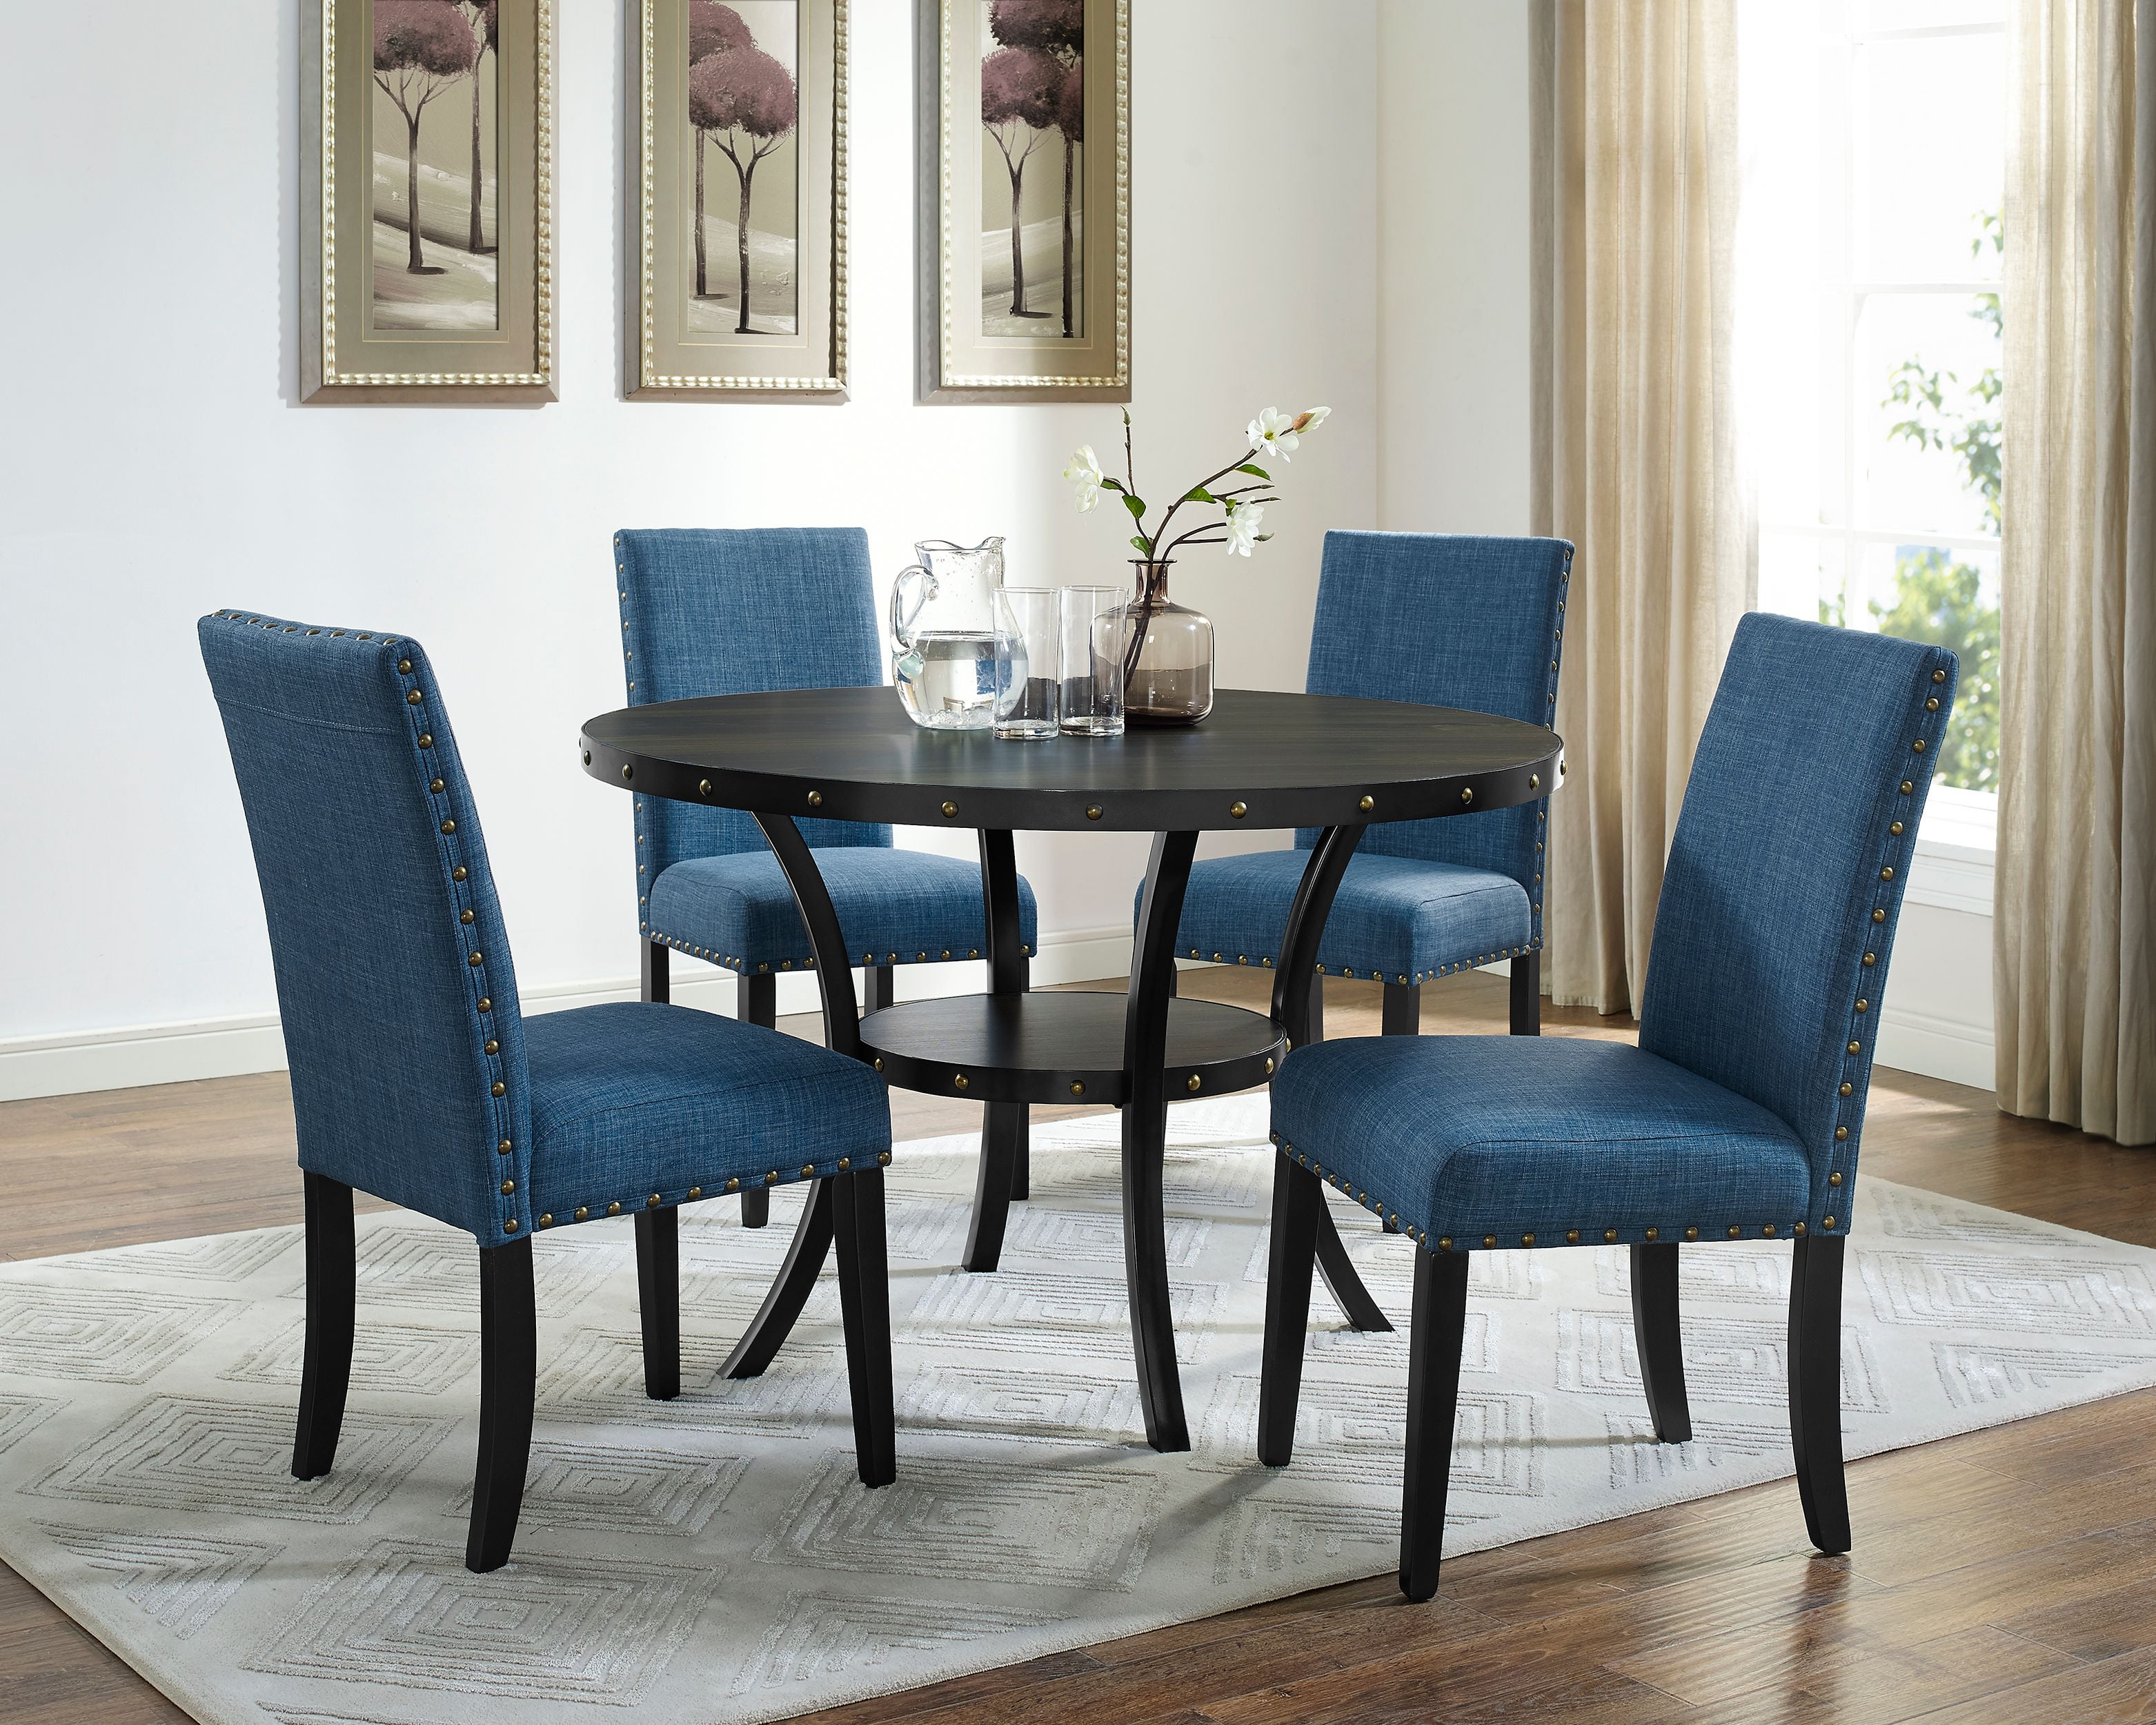 Blue and gold upholstered dining chair with nailhead trim - wide 6